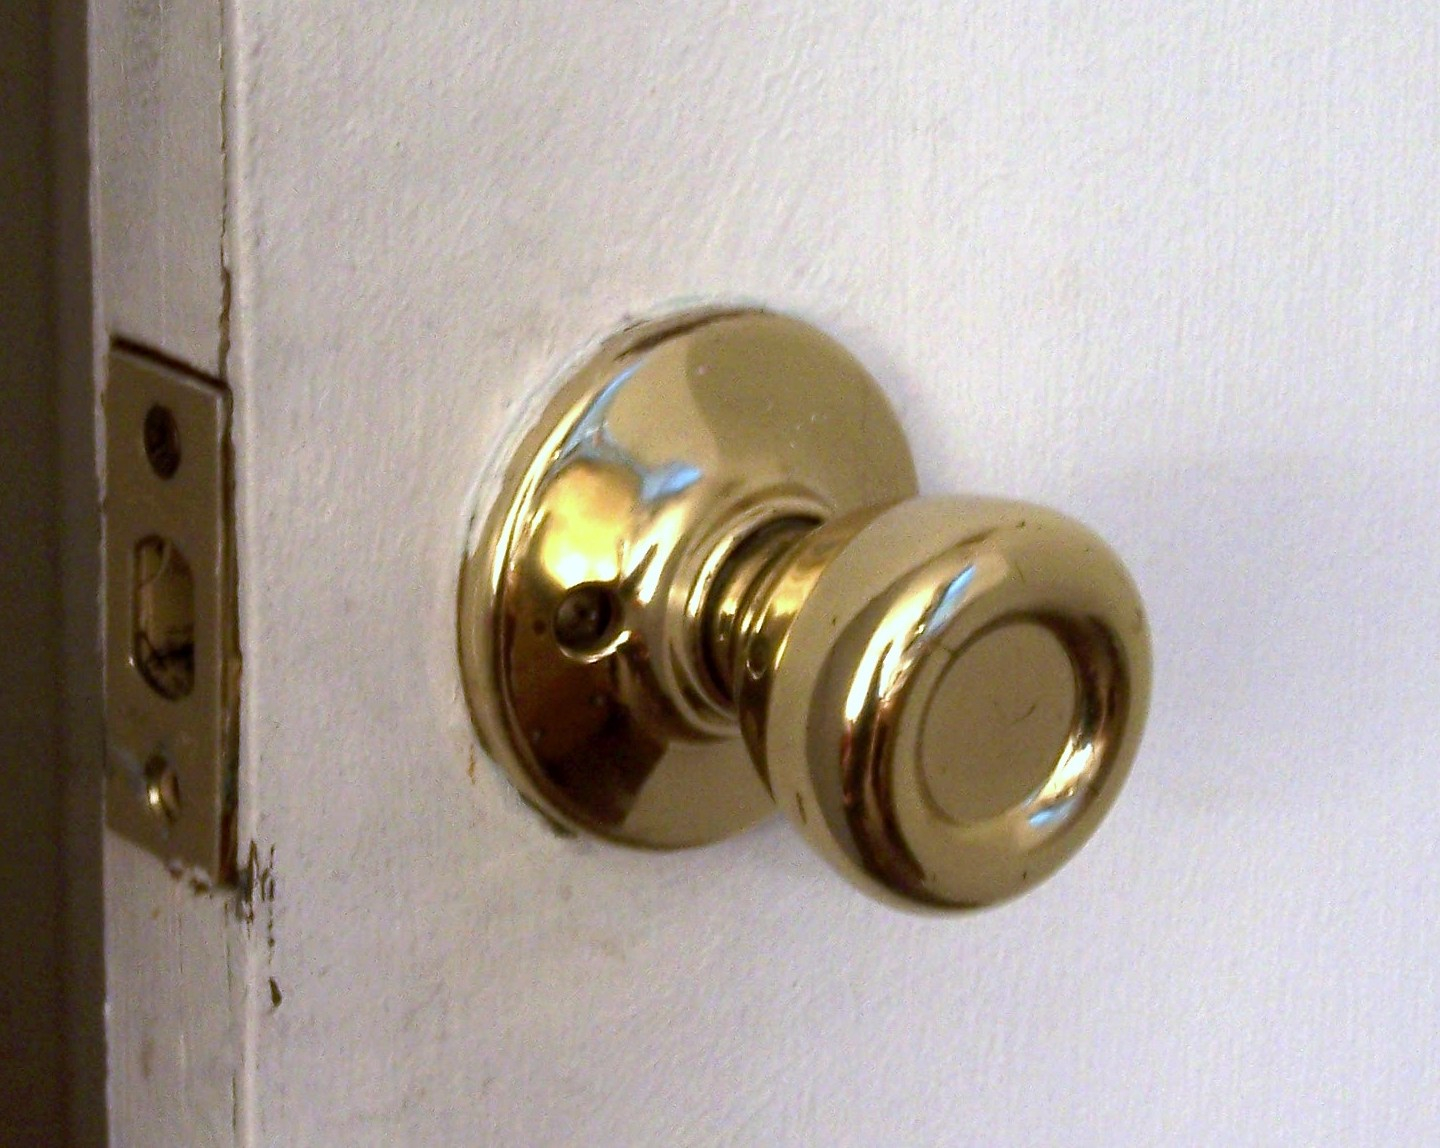 The Doorknob Comment Shirah Vollmer Md intended for size 1440 X 1148